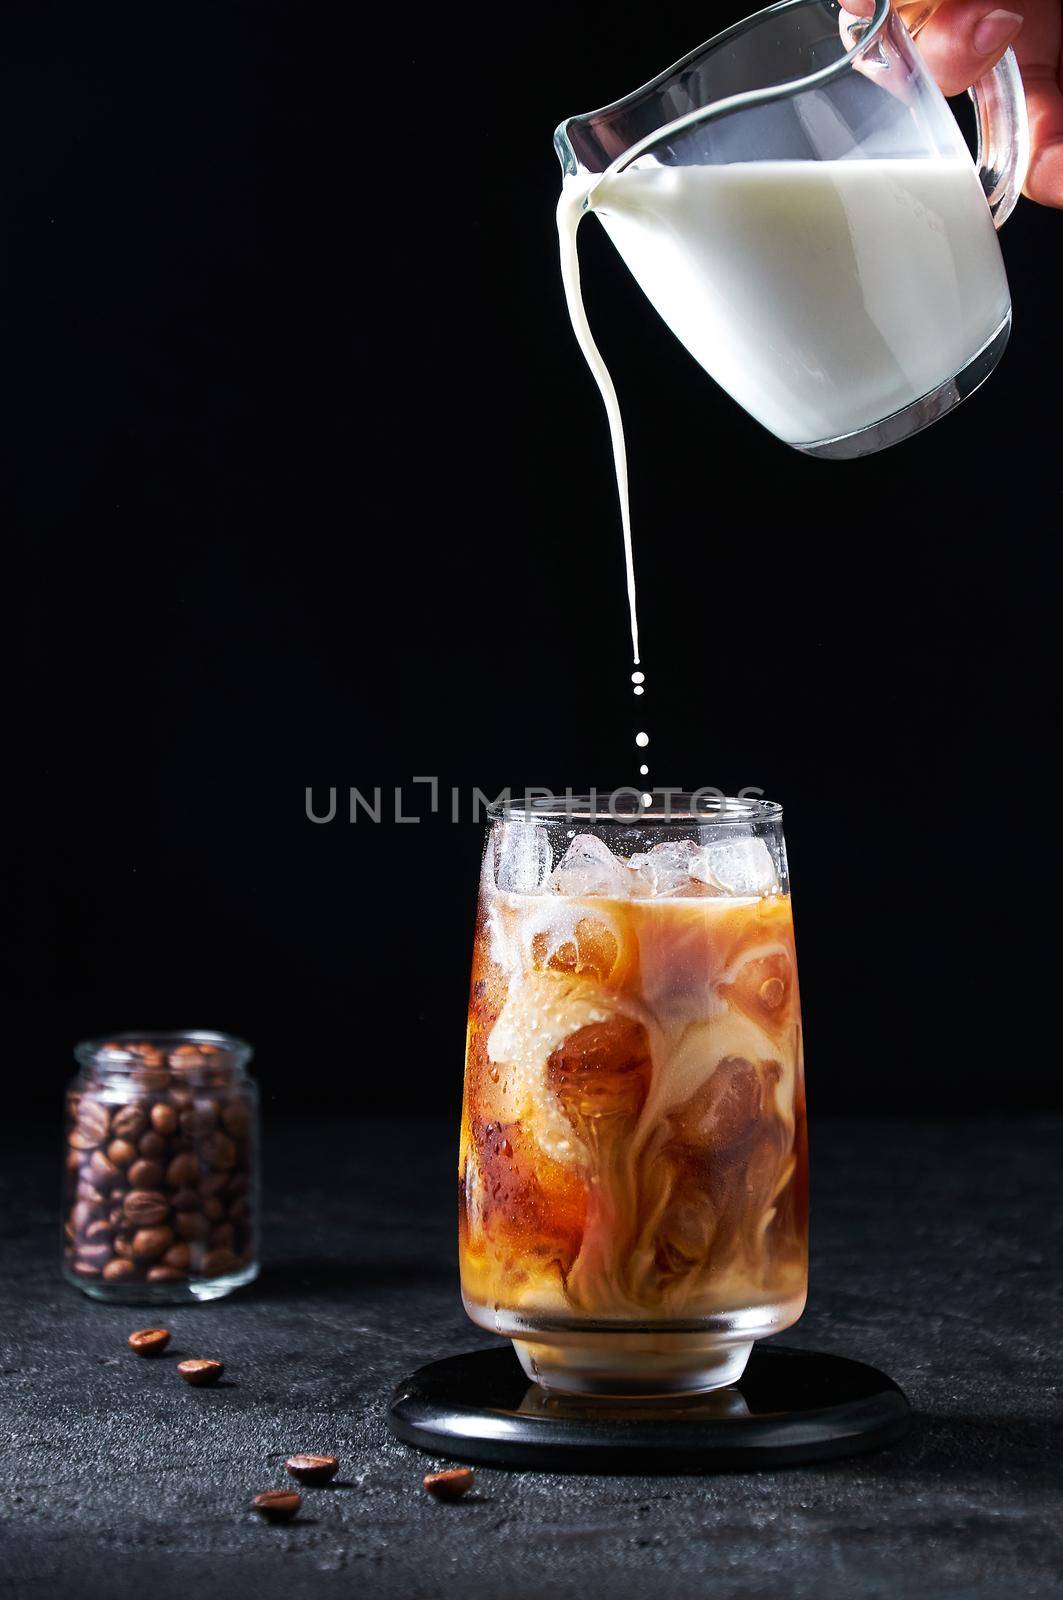 Cold Summer Drink. Iced Coffee with Pouring Milk in Tall Glass on Dark Background. Drinks in Motion.